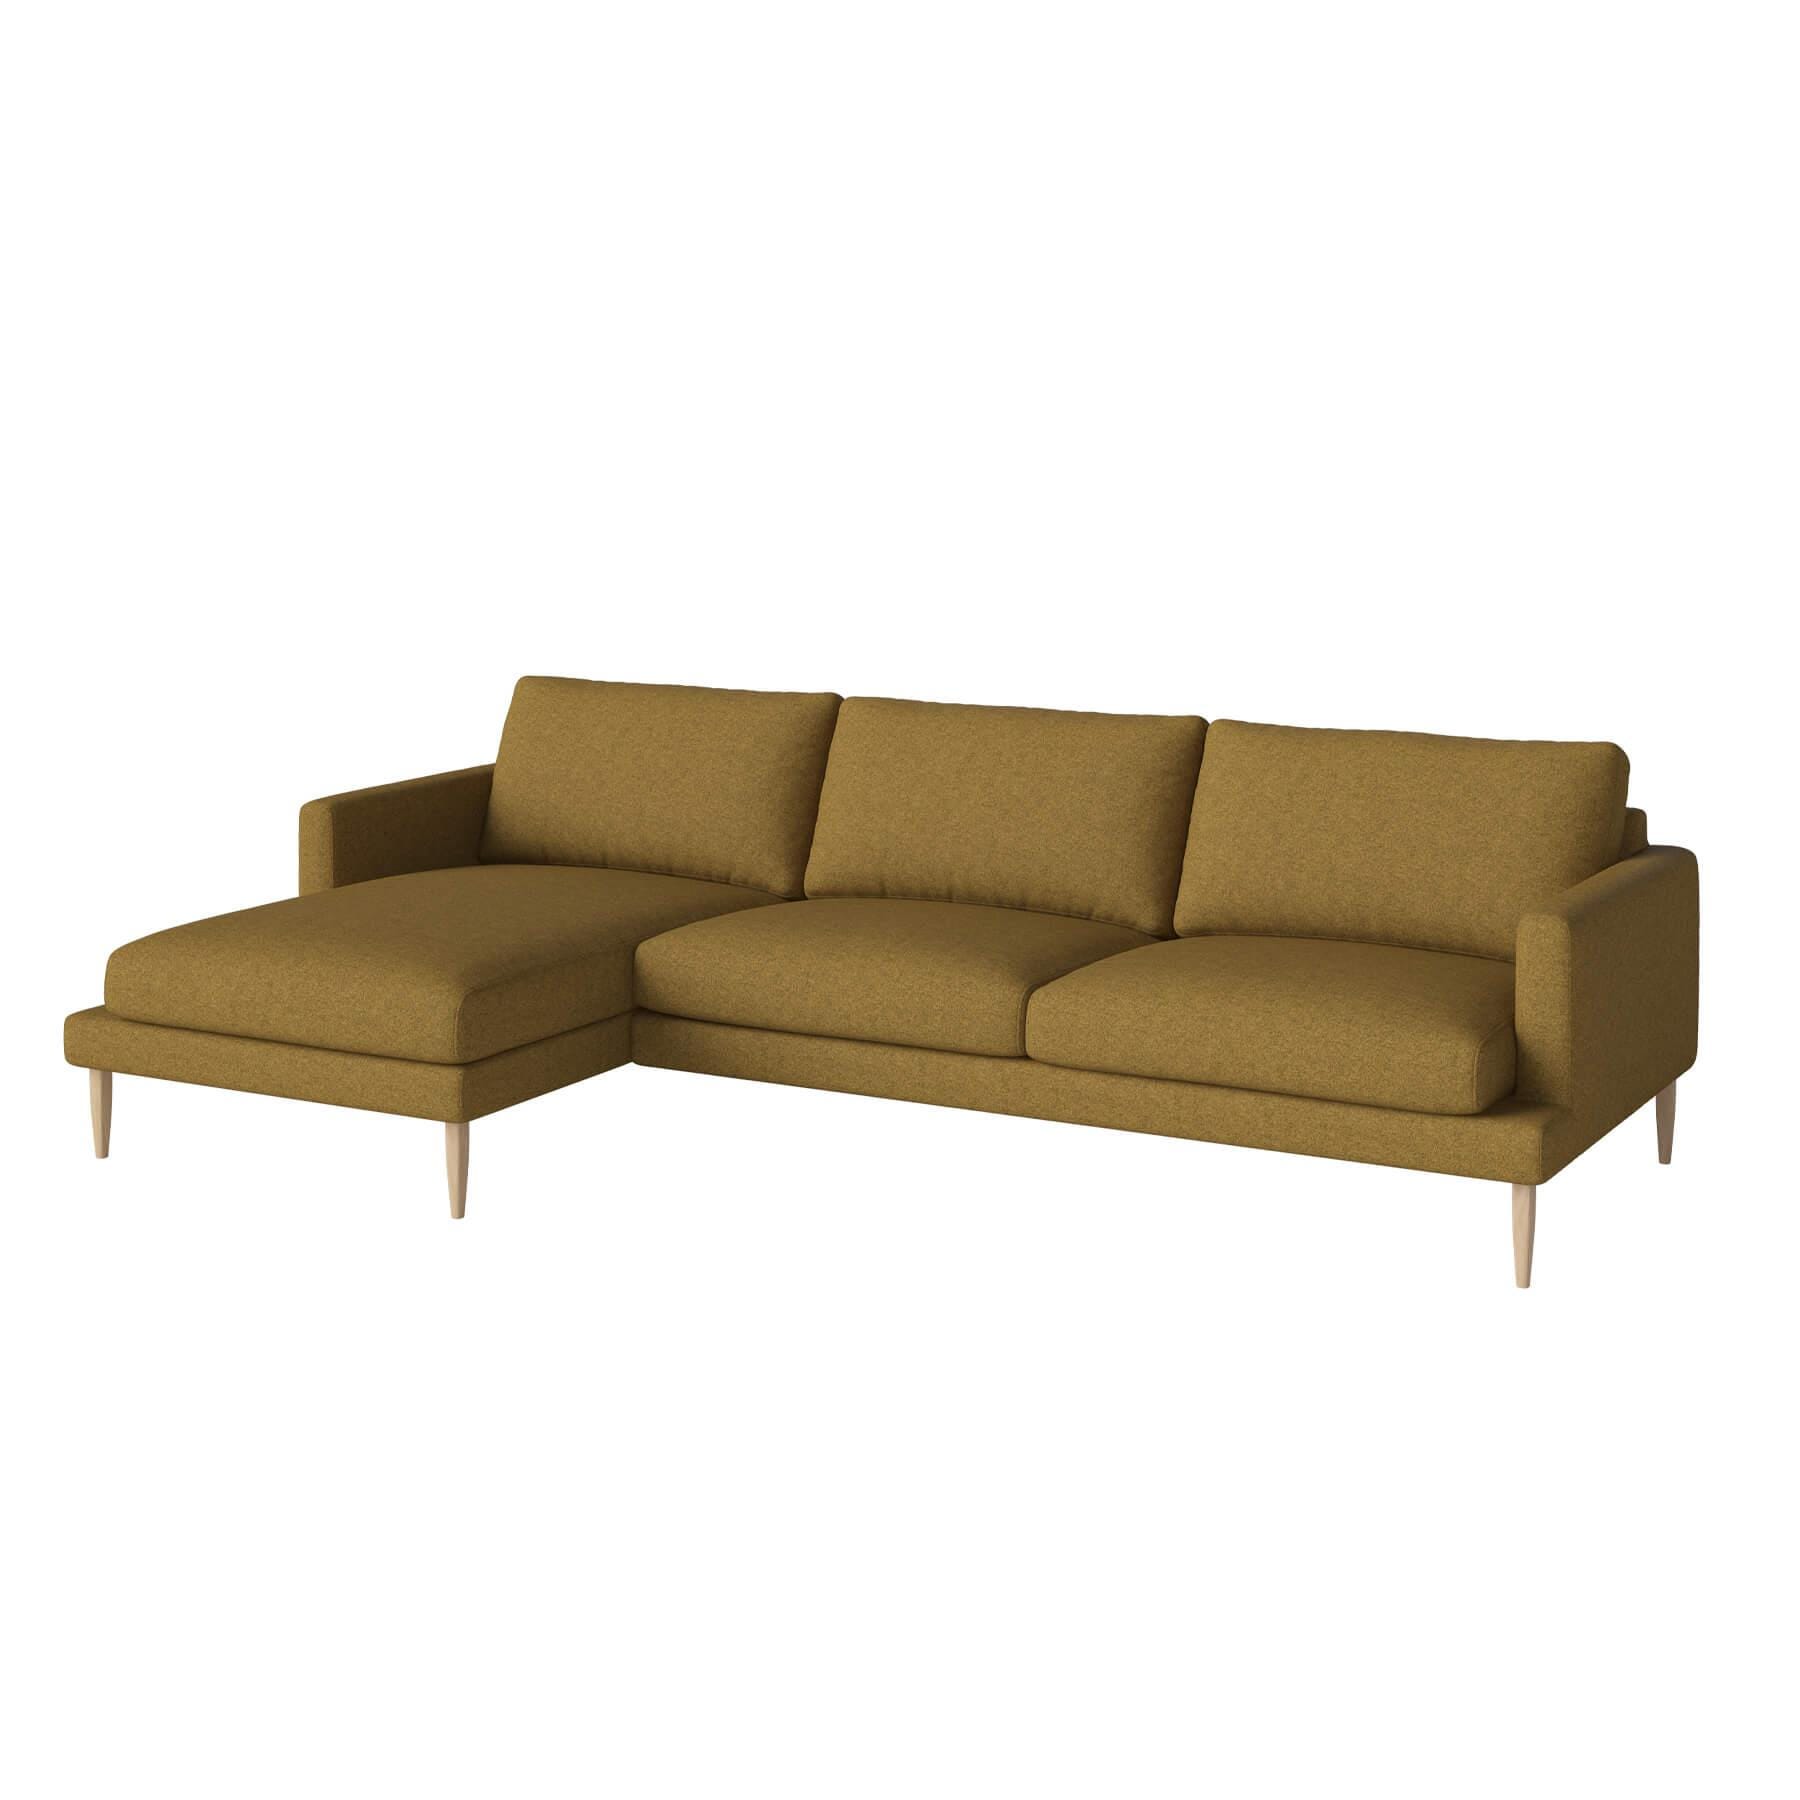 Bolia Veneda Sofa 35 Seater Sofa With Chaise Longue White Oiled Oak Qual Curry Left Brown Designer Furniture From Holloways Of Ludlow